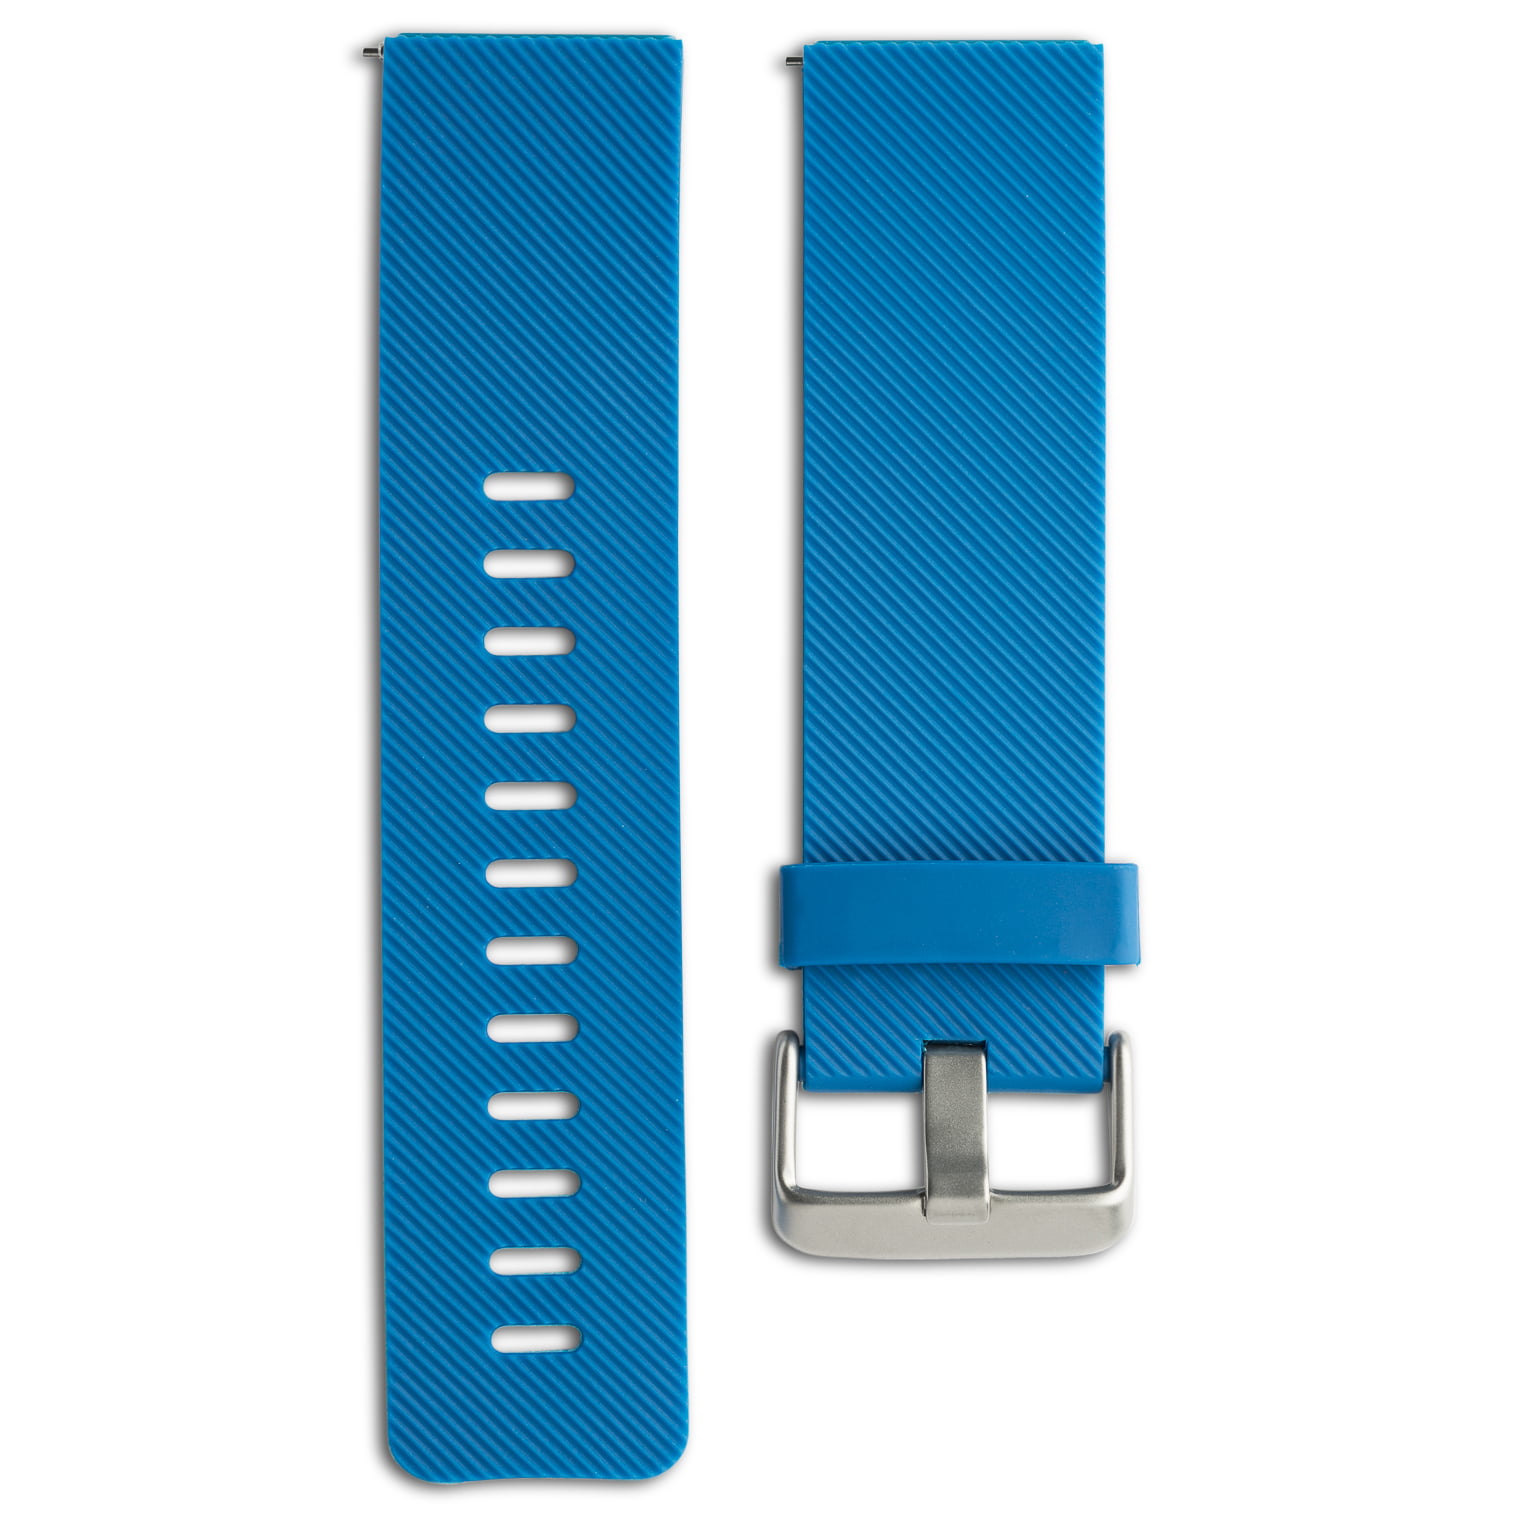 ONN* Adjustable FITBIT BLAZE Metal Buckle REPLACEMENT BAND TEAL New! 